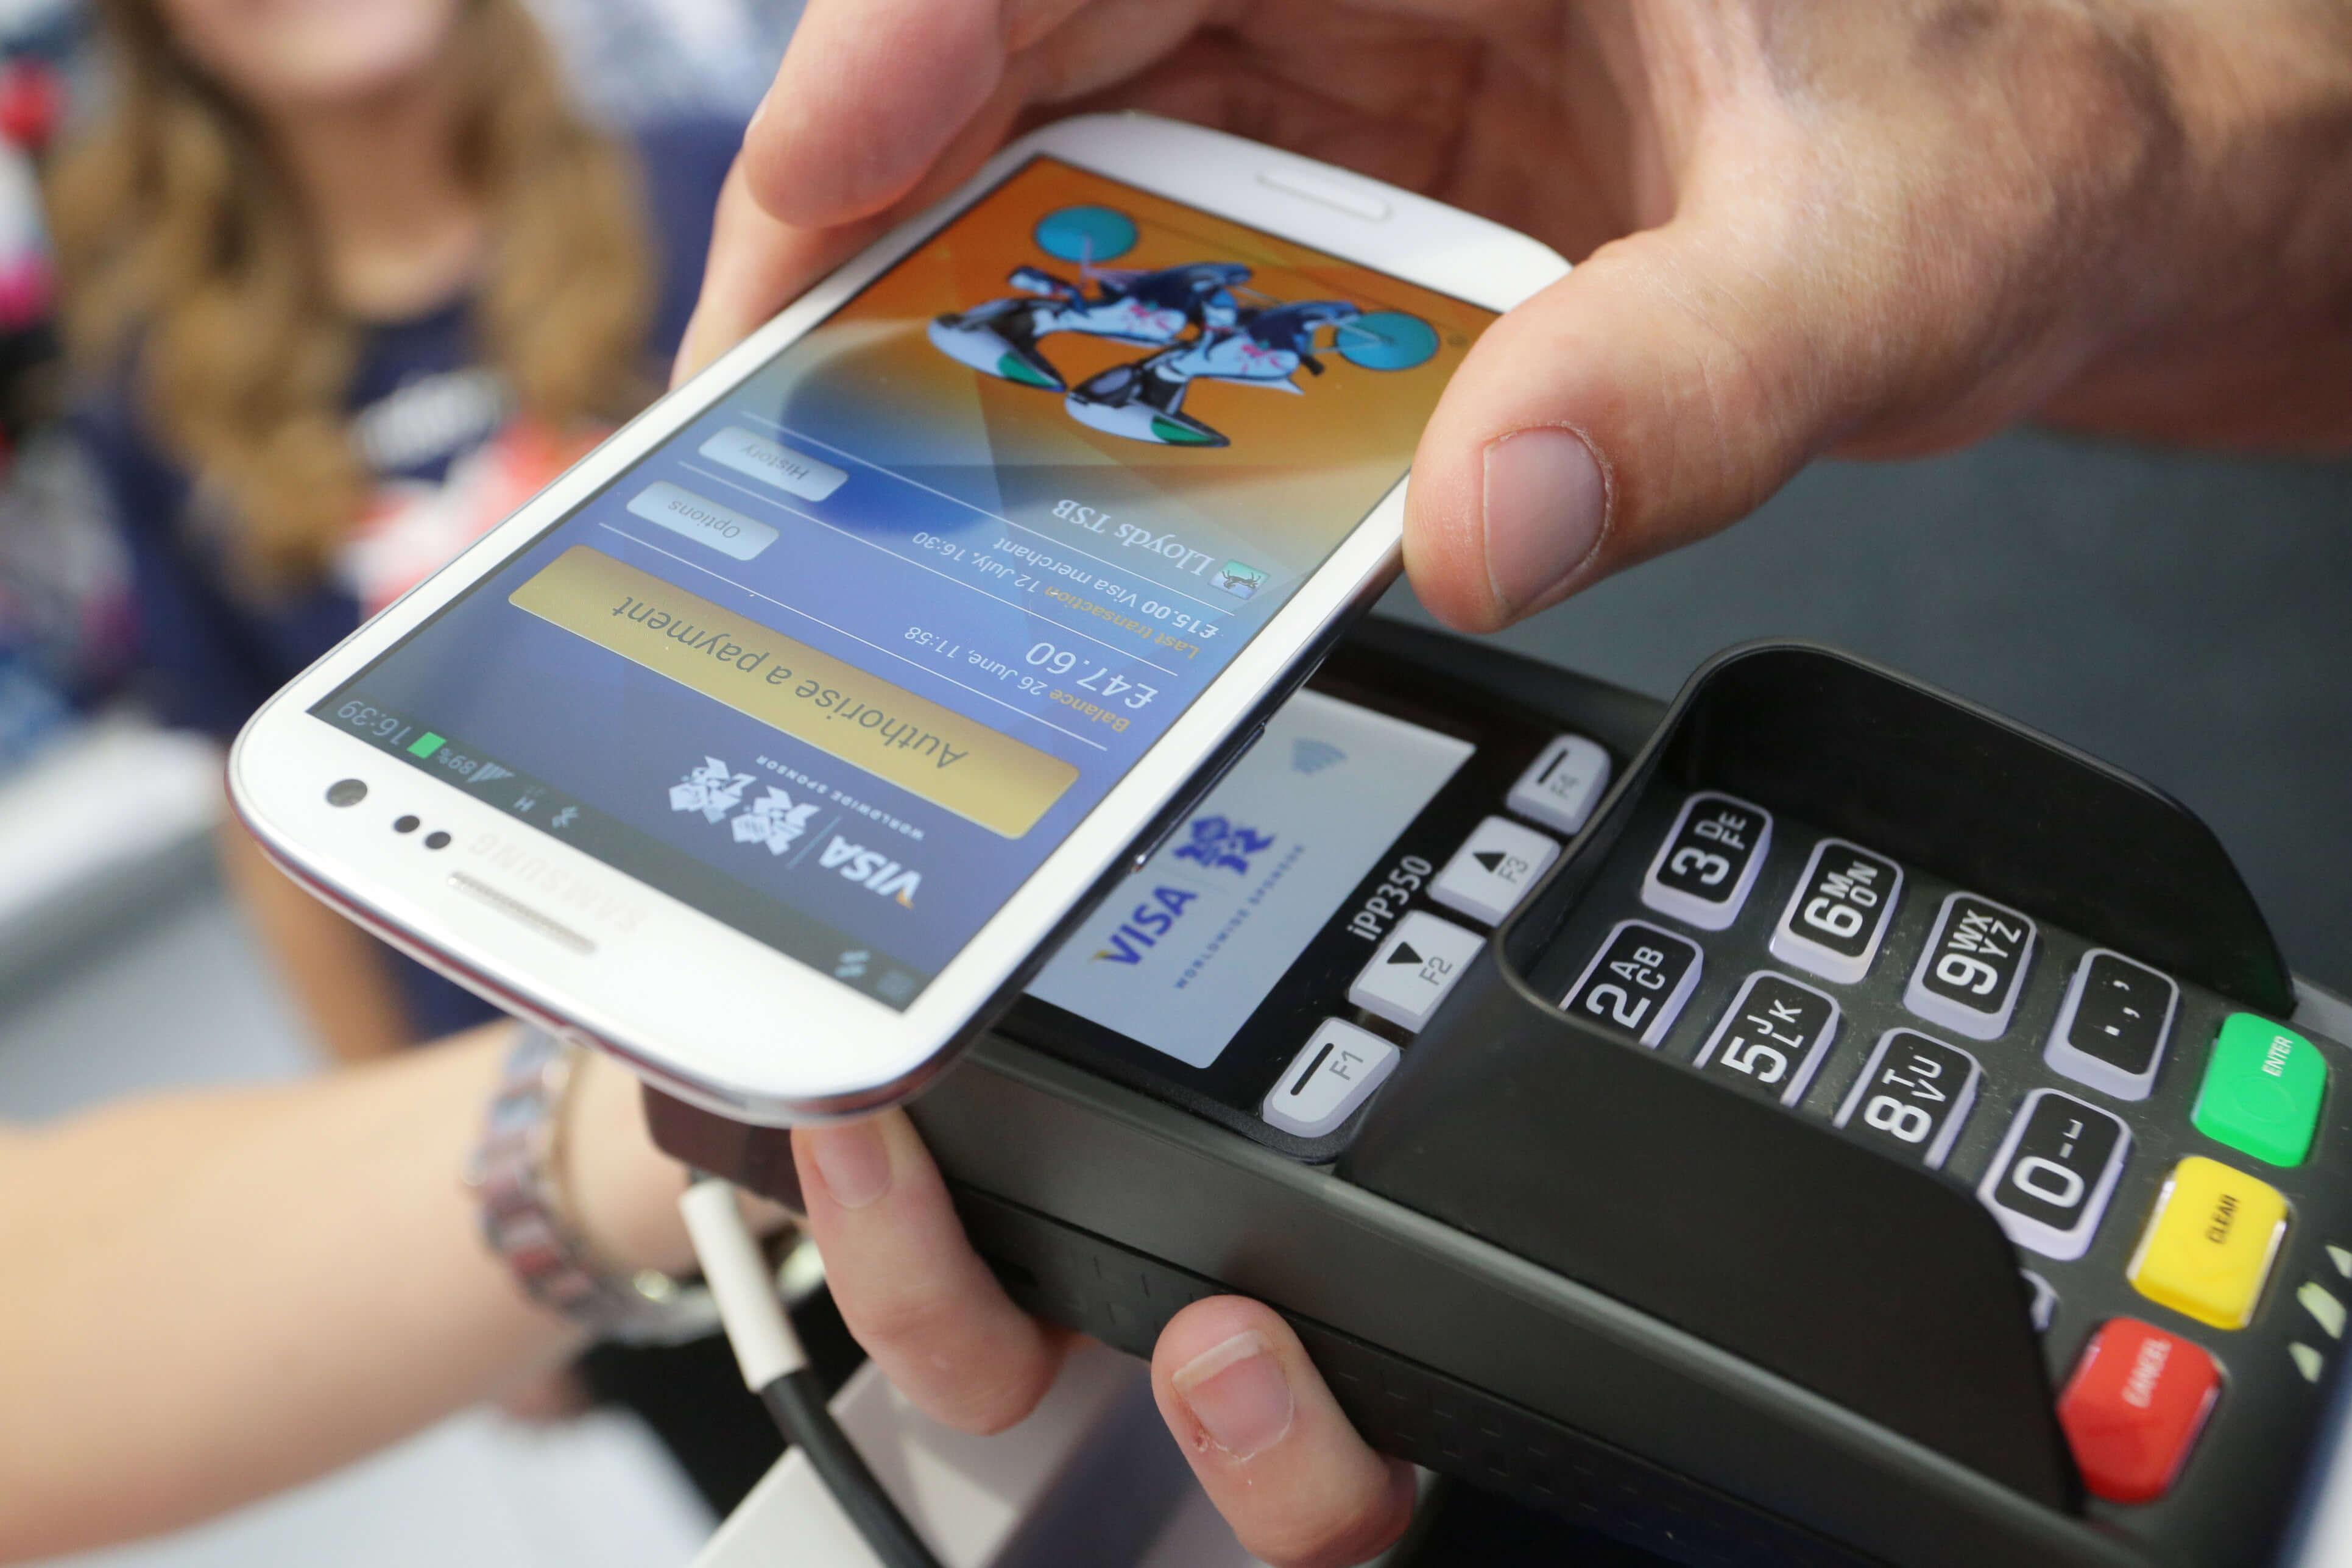 Android smartphone being used as a digital wallet for a purchase